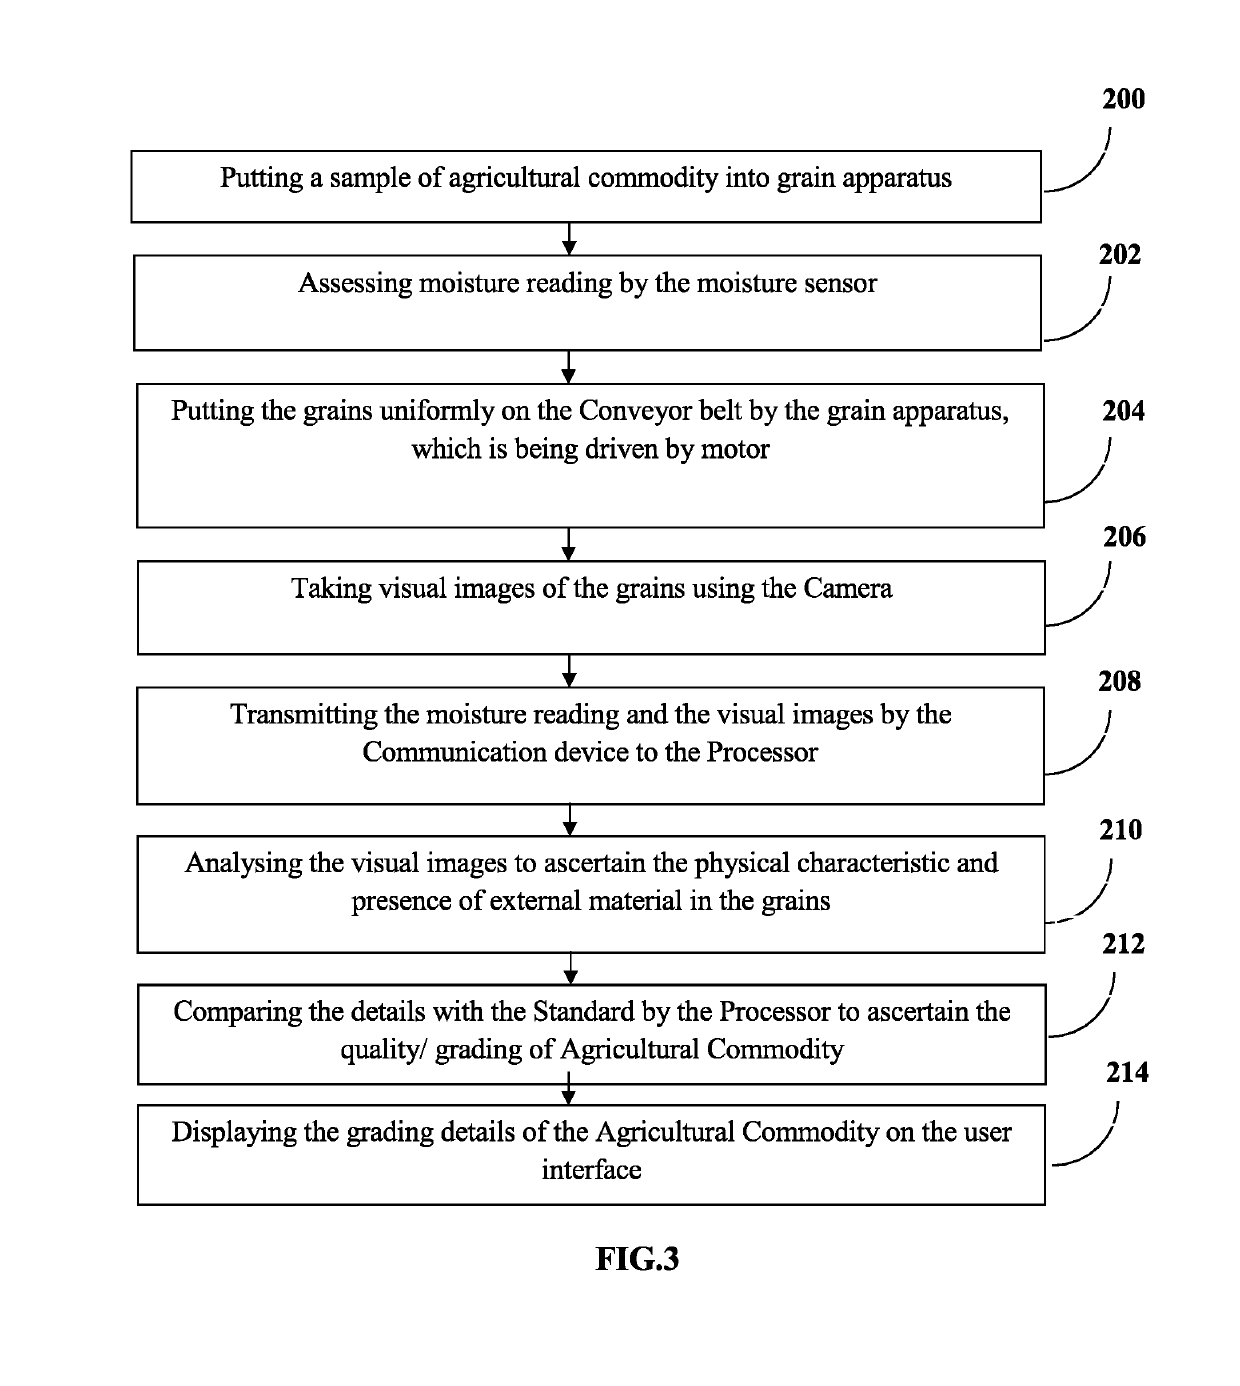 System and Method for Grading Agricultural Commodity